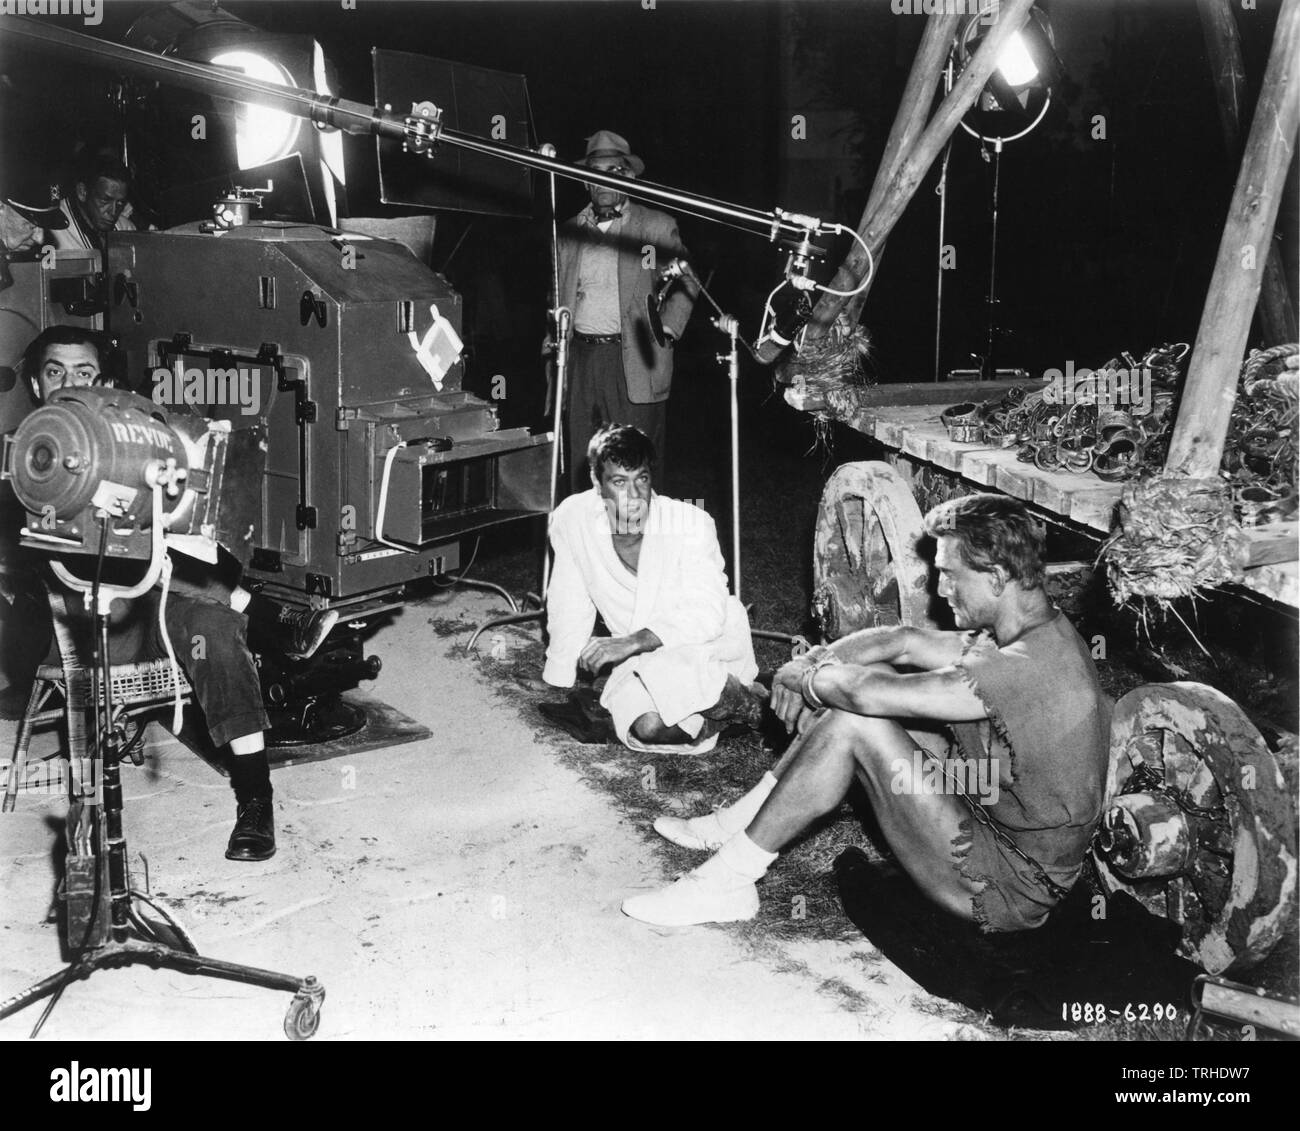 Stanley Kubrick directing Tony Curtis and Kirk Douglas SPARTACUS 1960 on set candid filming screenplay Dalton Trumbo novel Howard Fast Bryna Productions / Universal Pictures Stock Photo